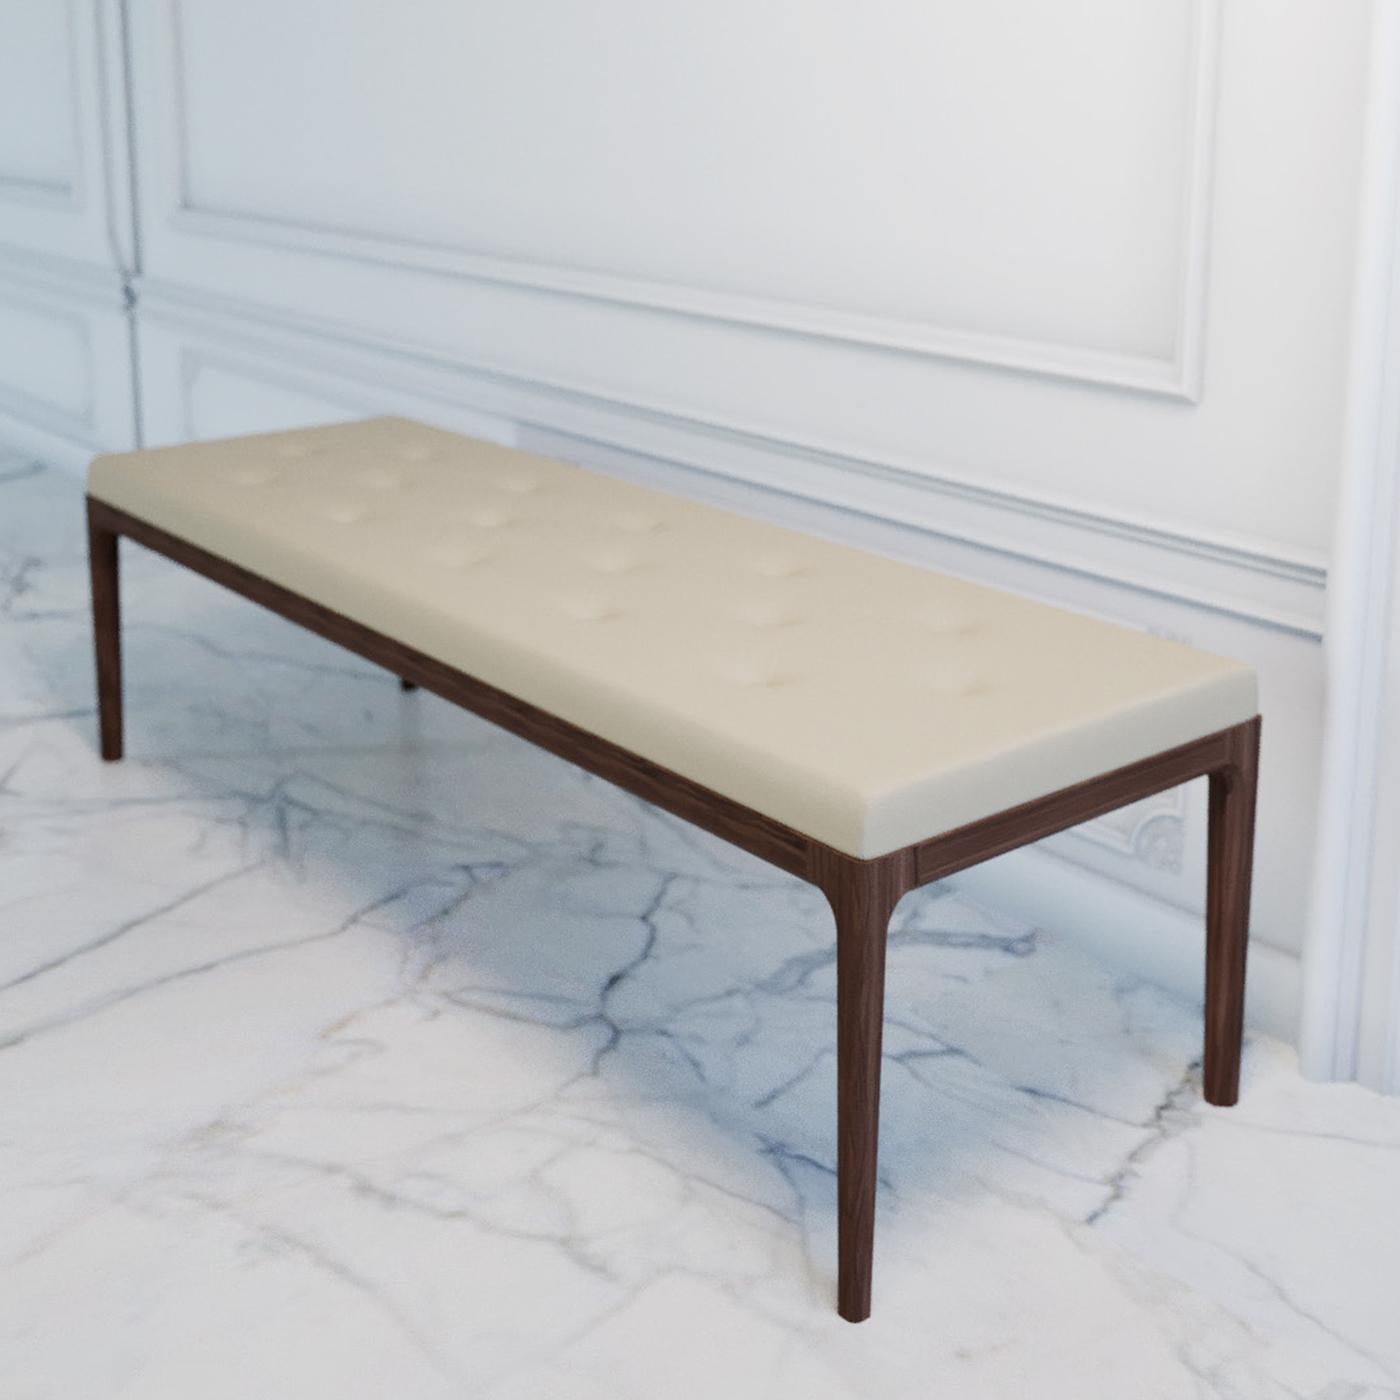 This sophisticated bench showcases an essential silhouette sitting atop four straight legs in solid, walnut-finished ash. The rectangular seat features generous padding, while the quilted beige upholstery lends it a stylish flair. Due to its